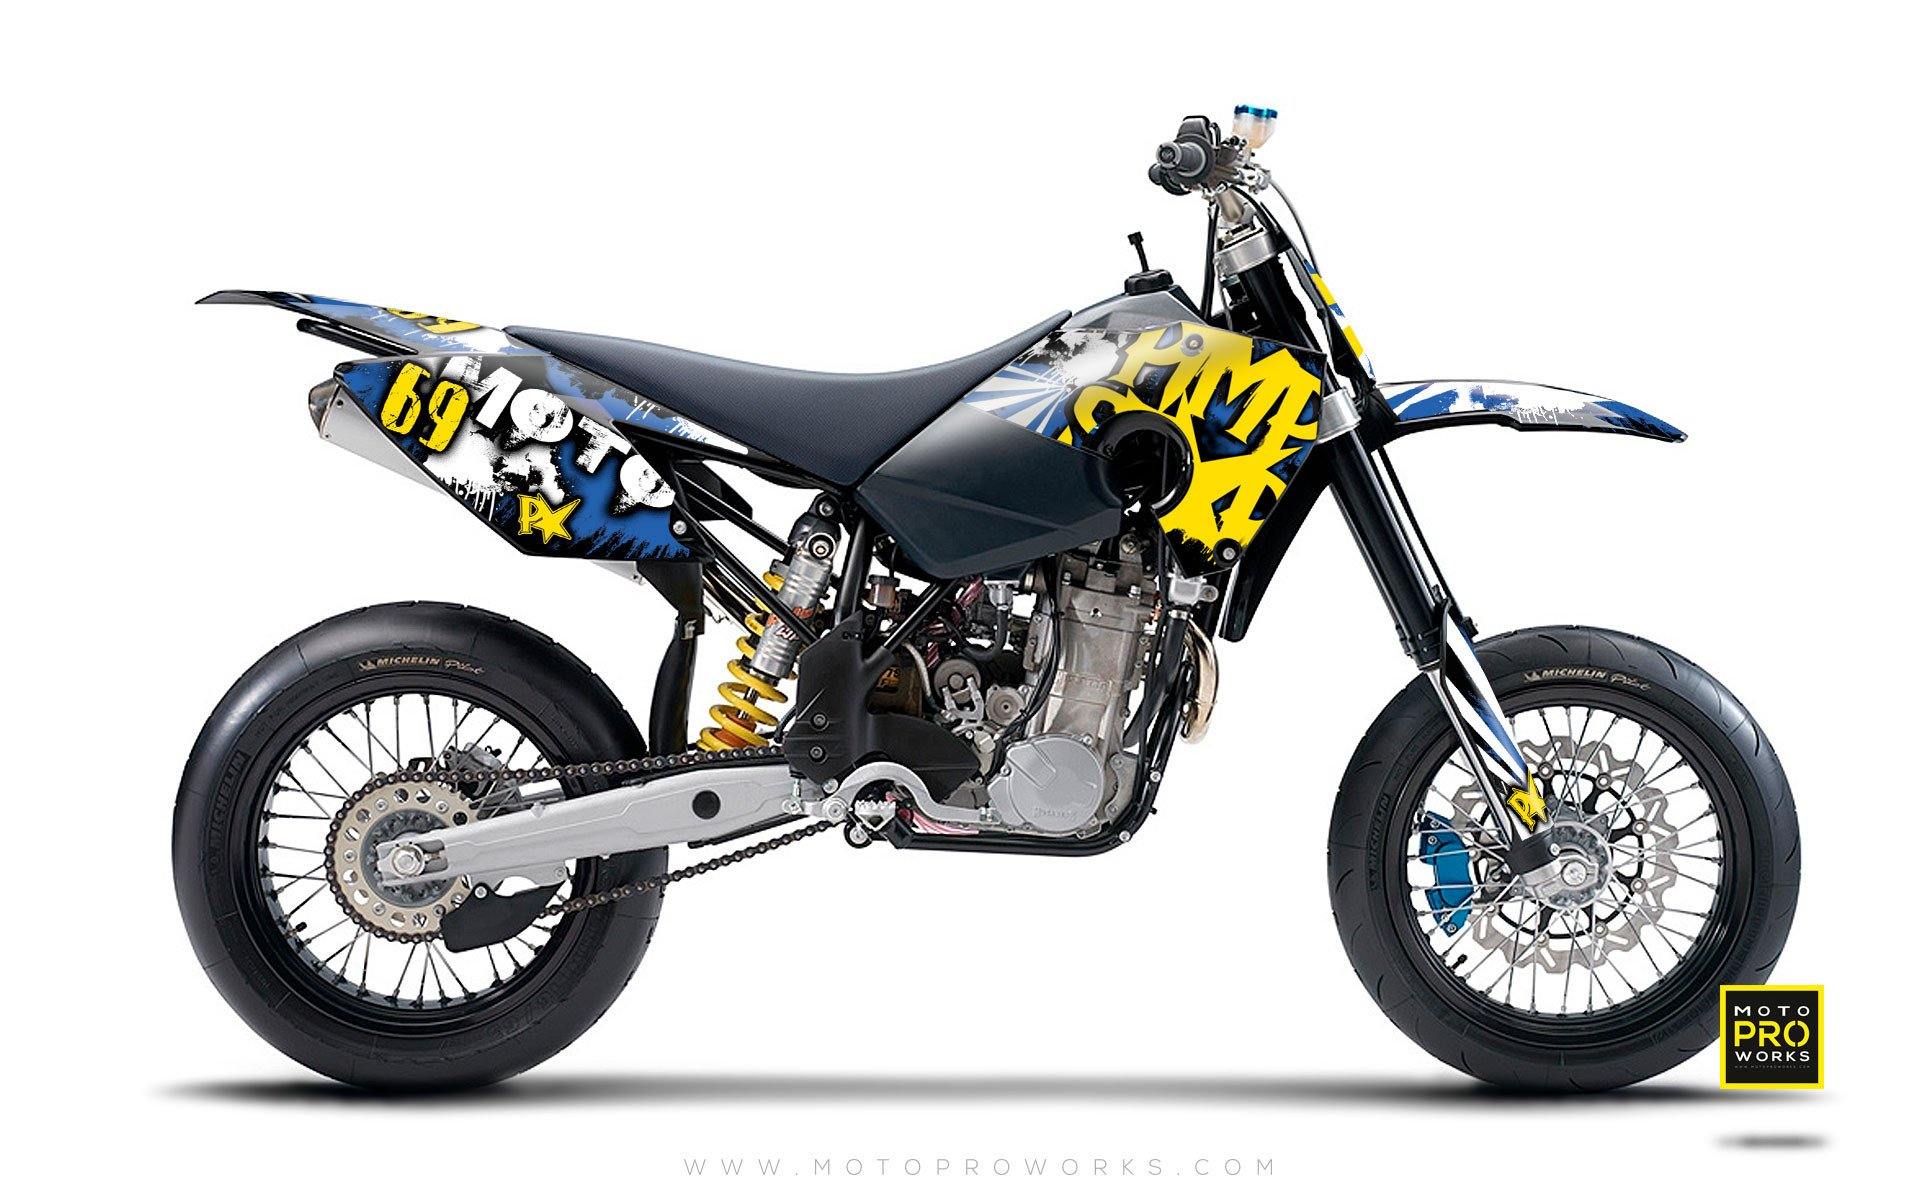 Husaberg GRAPHIC KIT - "RISING SUNNY" (blue) - MotoProWorks | Decals and Bike Graphic kit